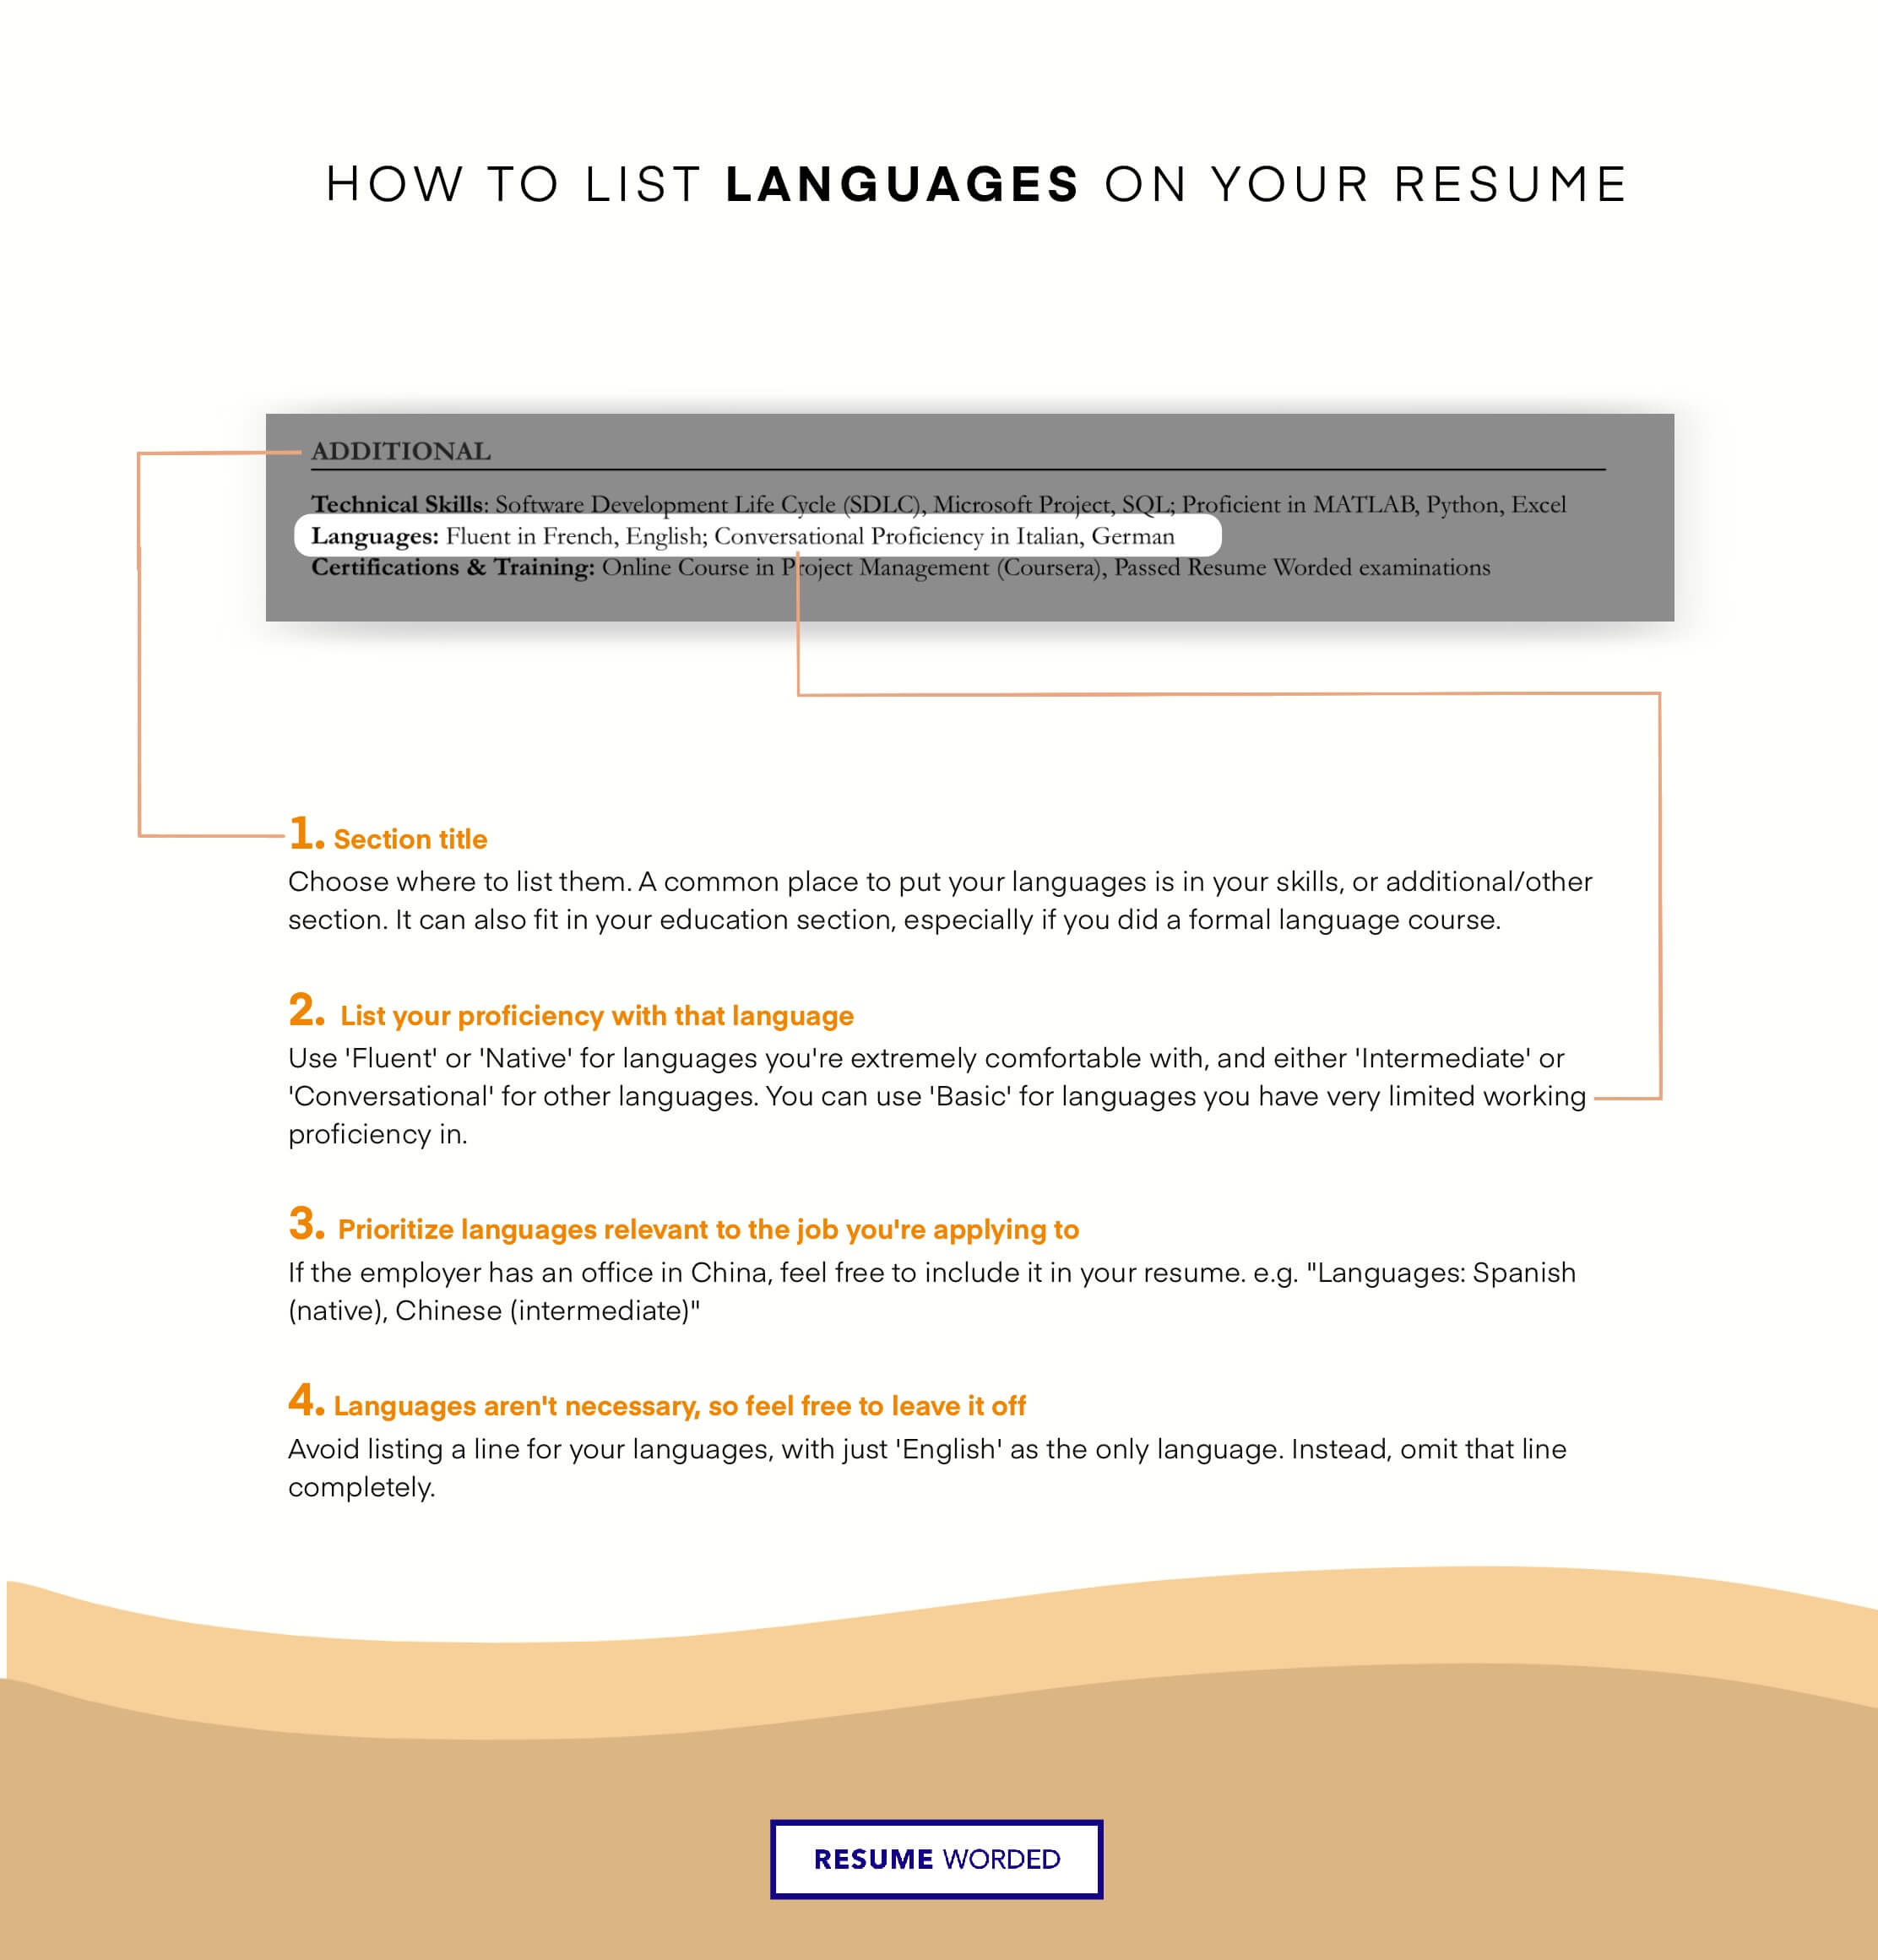 Include any extra languages you speak. - Advertising Account Manager Resume